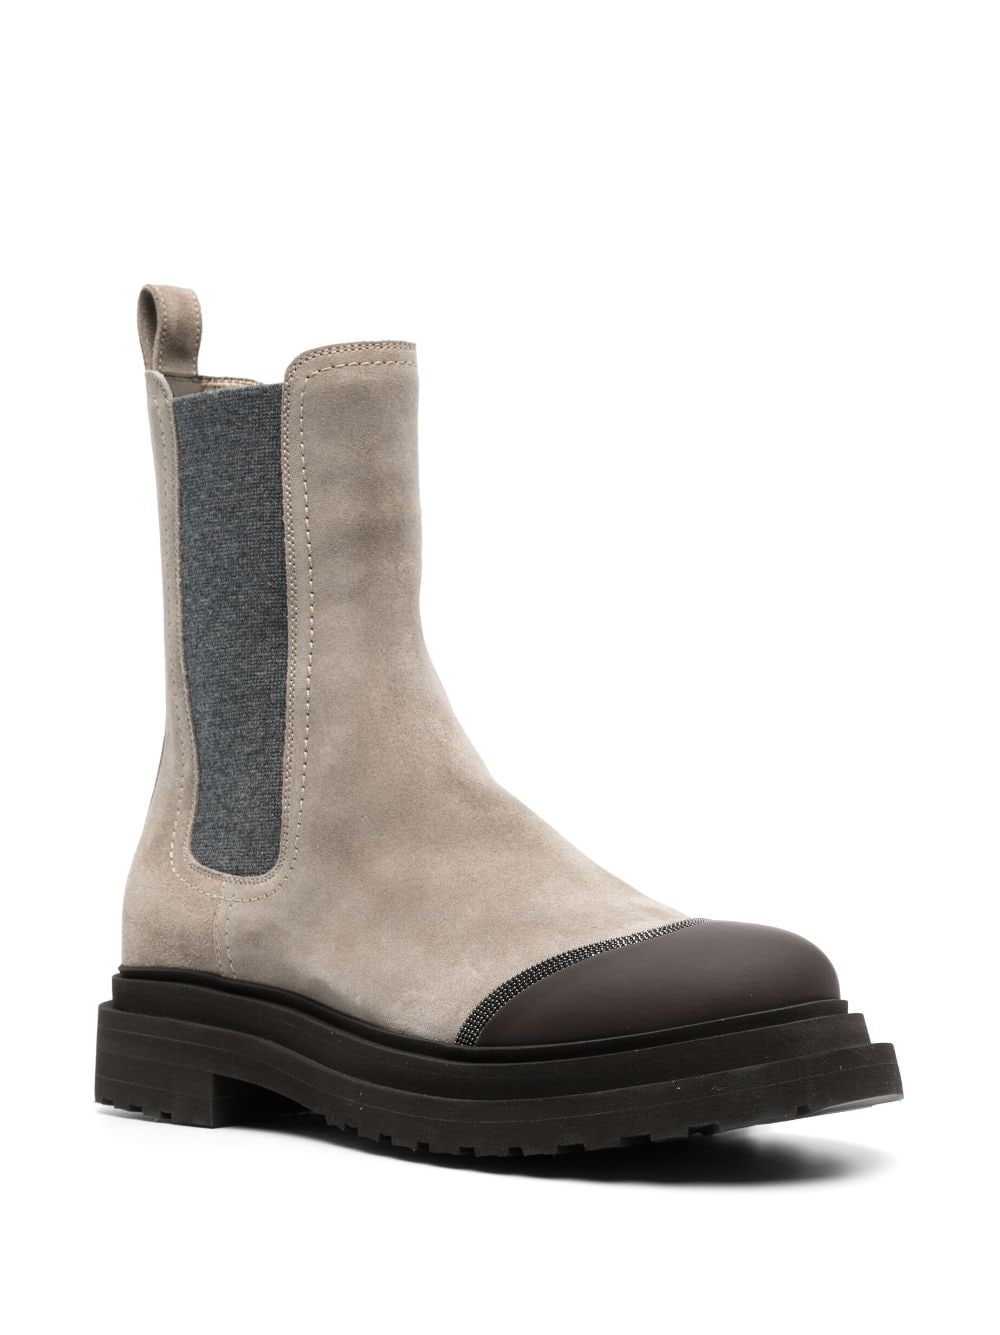 Brunello Cucinelli 50mm Suede Ankle Boots - Farfetch